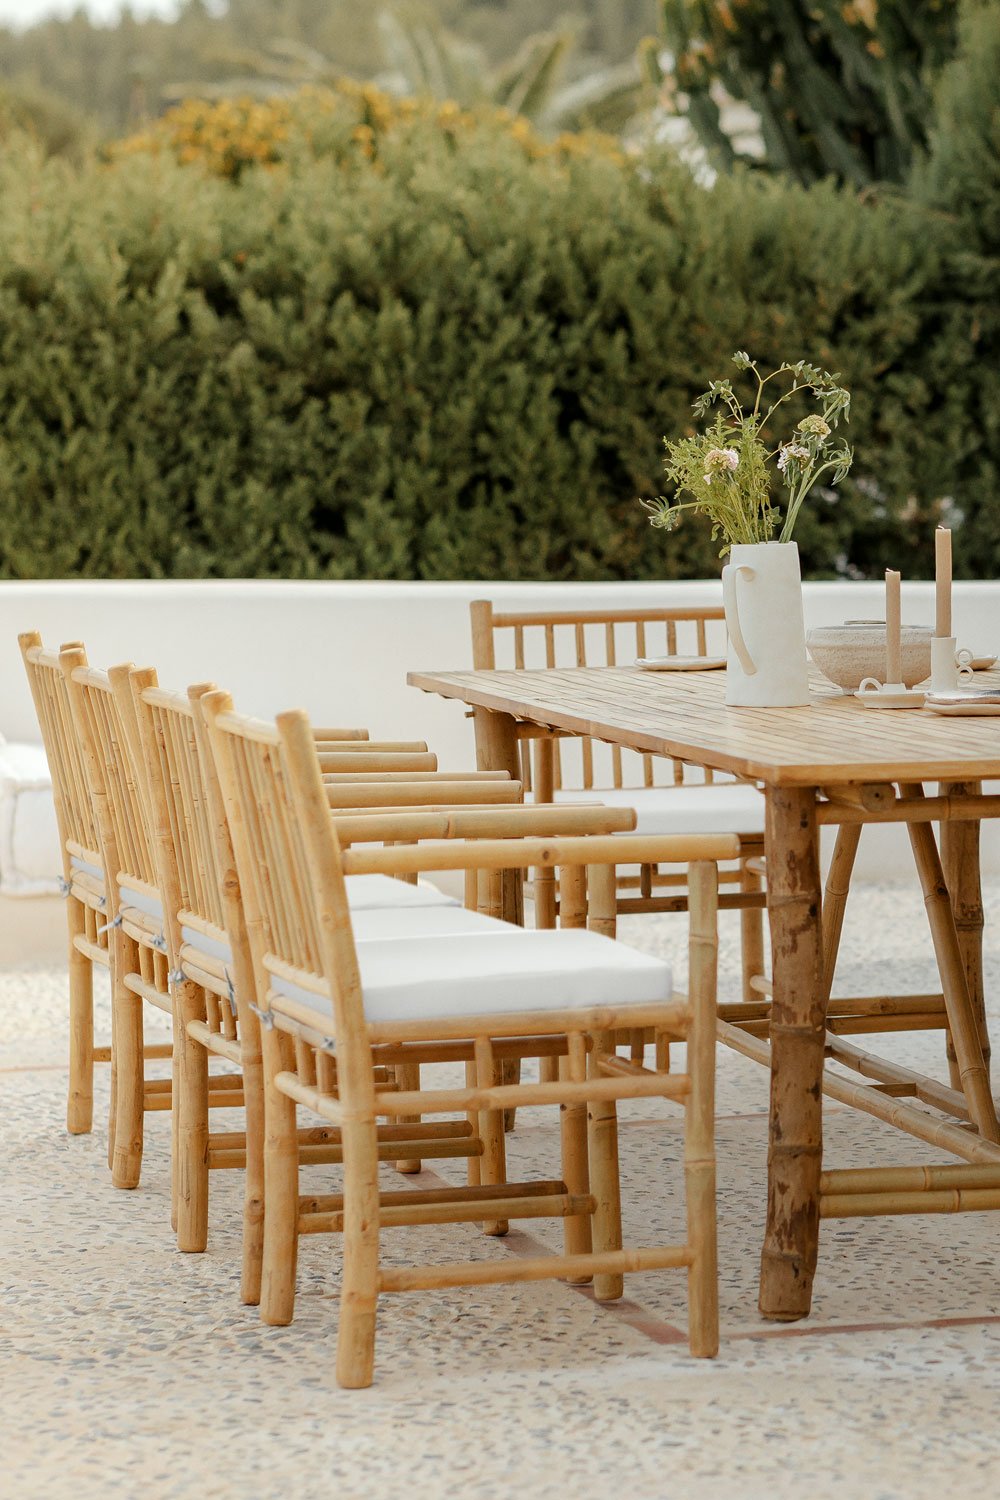 Set of Rectangular Table (250x100 cm) and 10 Garden Chairs with Armrests in Senia Bamboo, gallery image 1